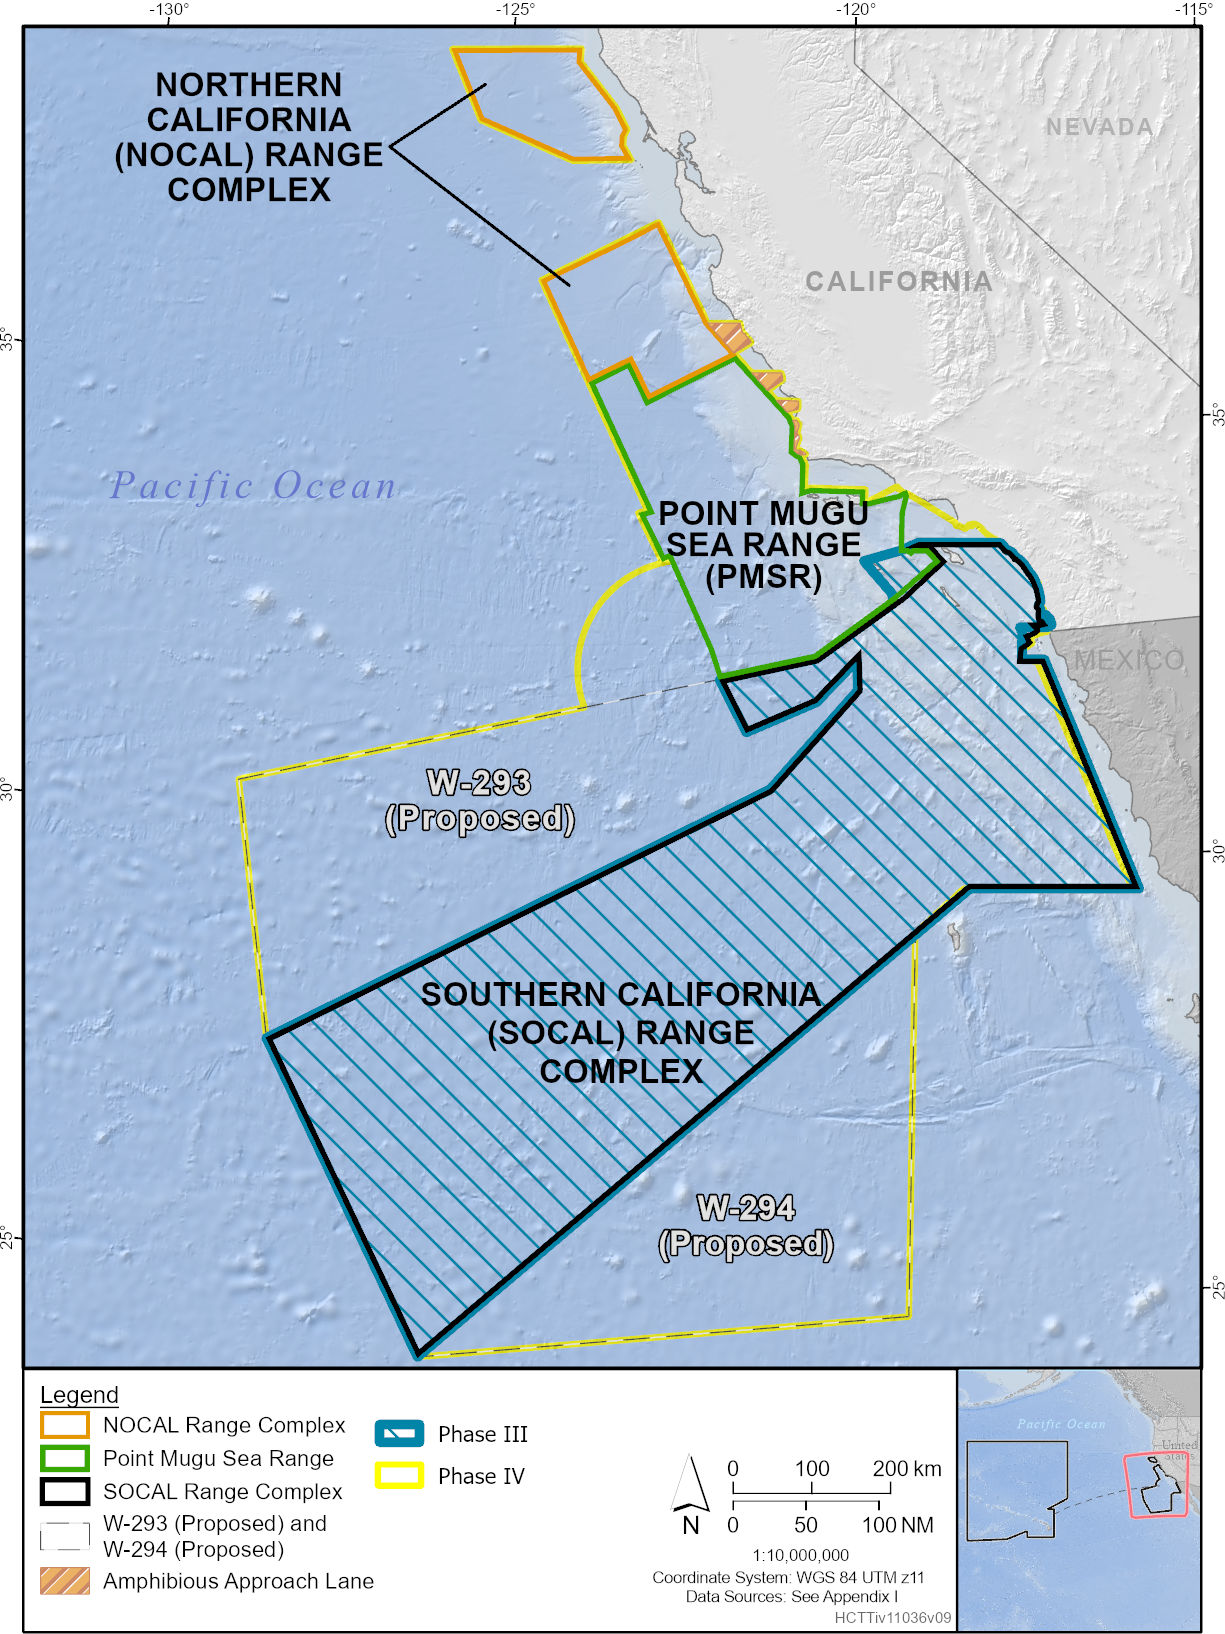 This is an image of a map showing the changes to the California Operating Area from the 2018 Hawaii-Southern California Training and Testing Study Area (Phase III analysis) to the new Hawaii-California Training and Testing Study Area (Phase IV analysis). The figure shows the Northern California Range Complex, Point Mugu Sea Range, Southern California Range Complex, the proposed W-293 and the proposed W-294, and amphibious approach lanes.